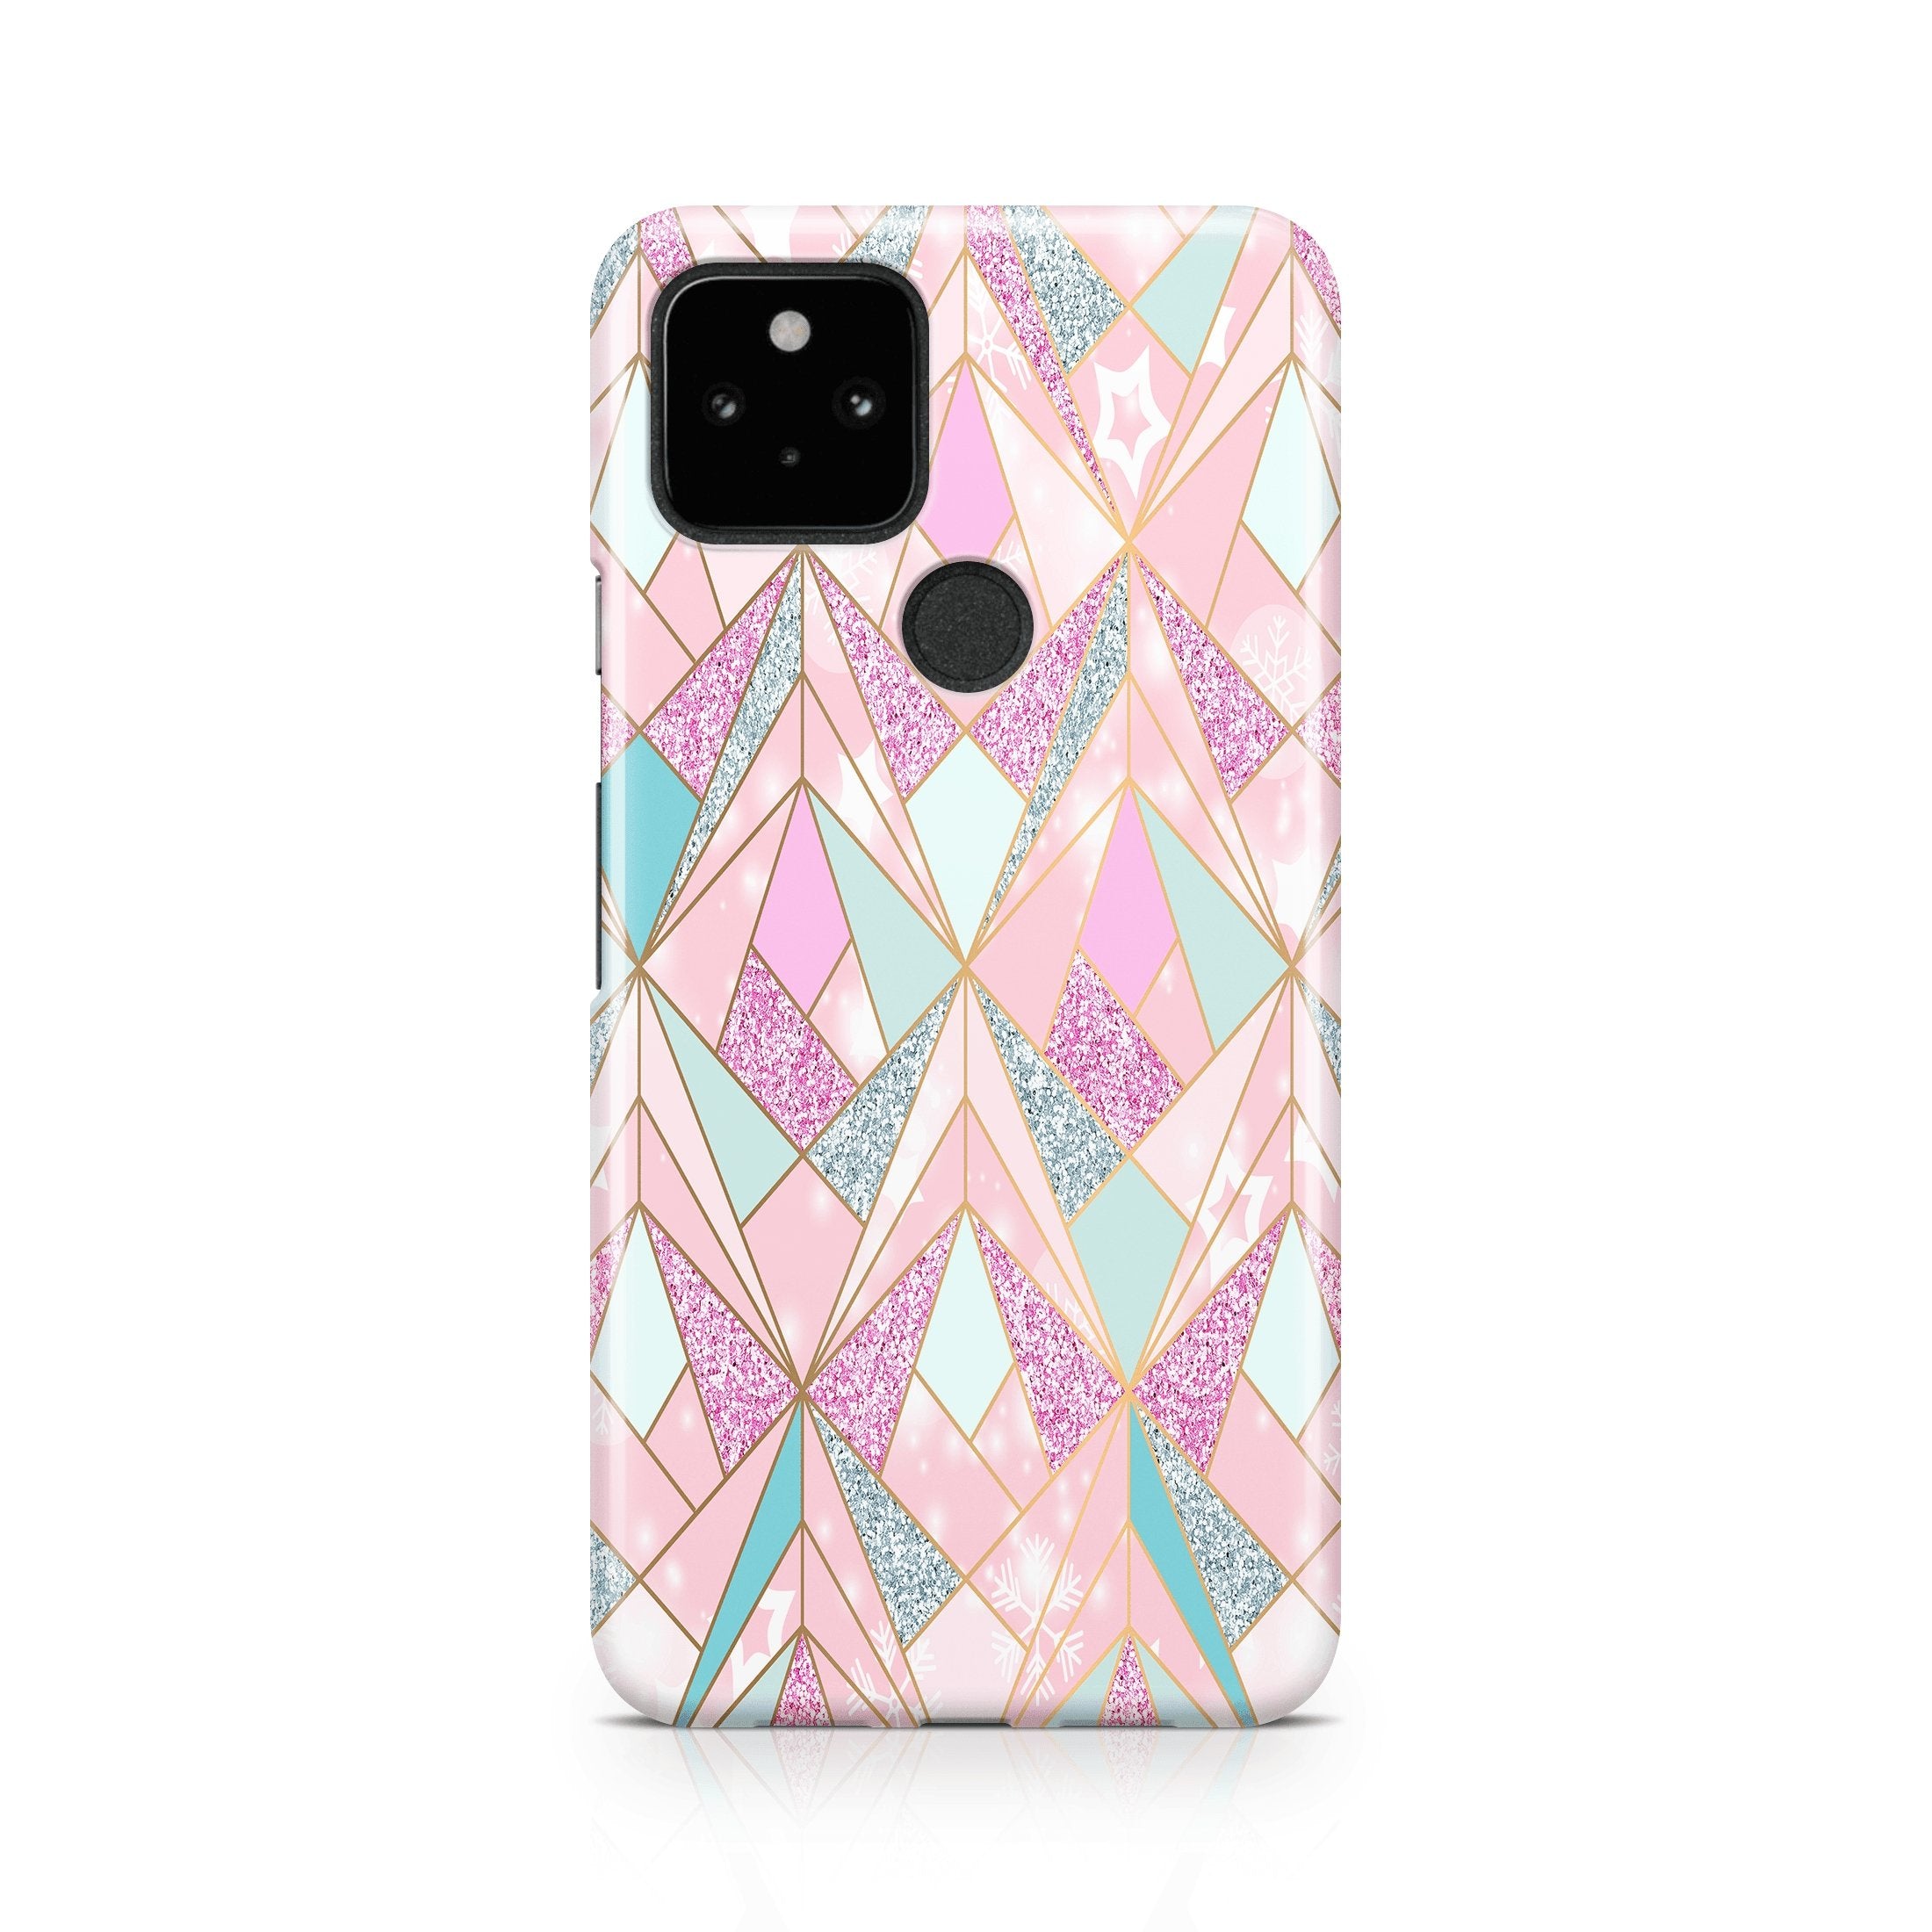 Geometric Winter - Google phone case designs by CaseSwagger